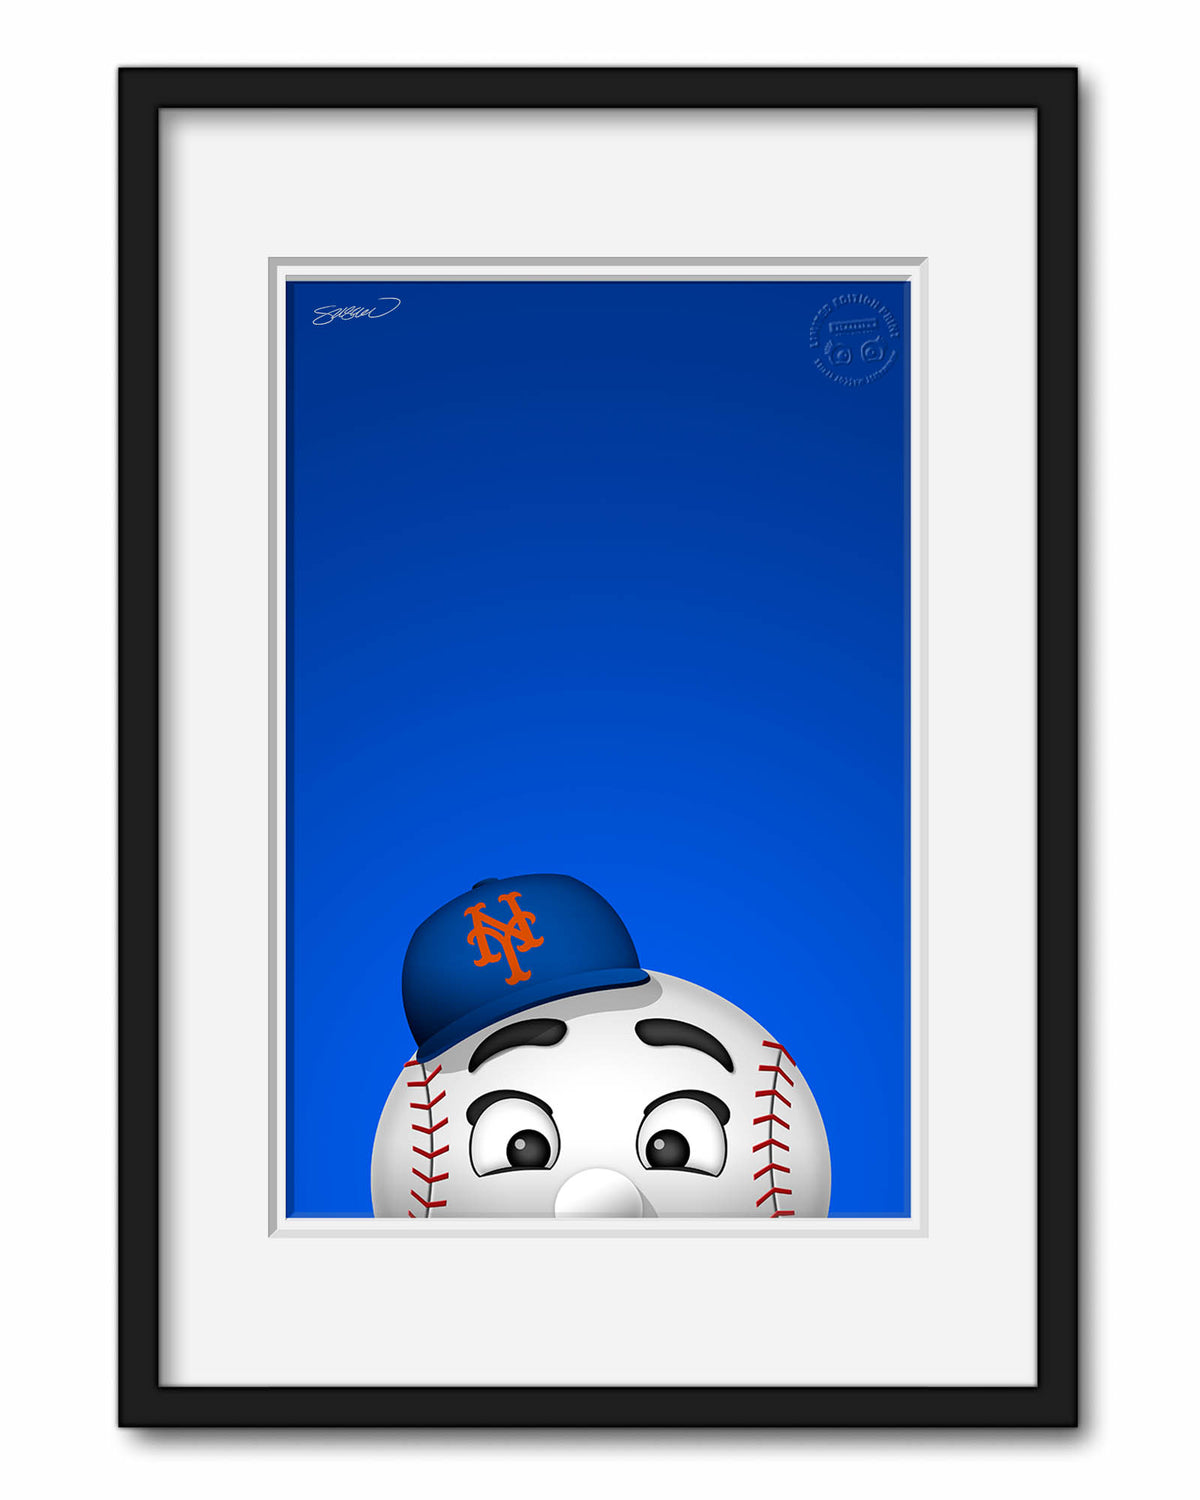 I made some mets Phone wallpapers : r/NewYorkMets